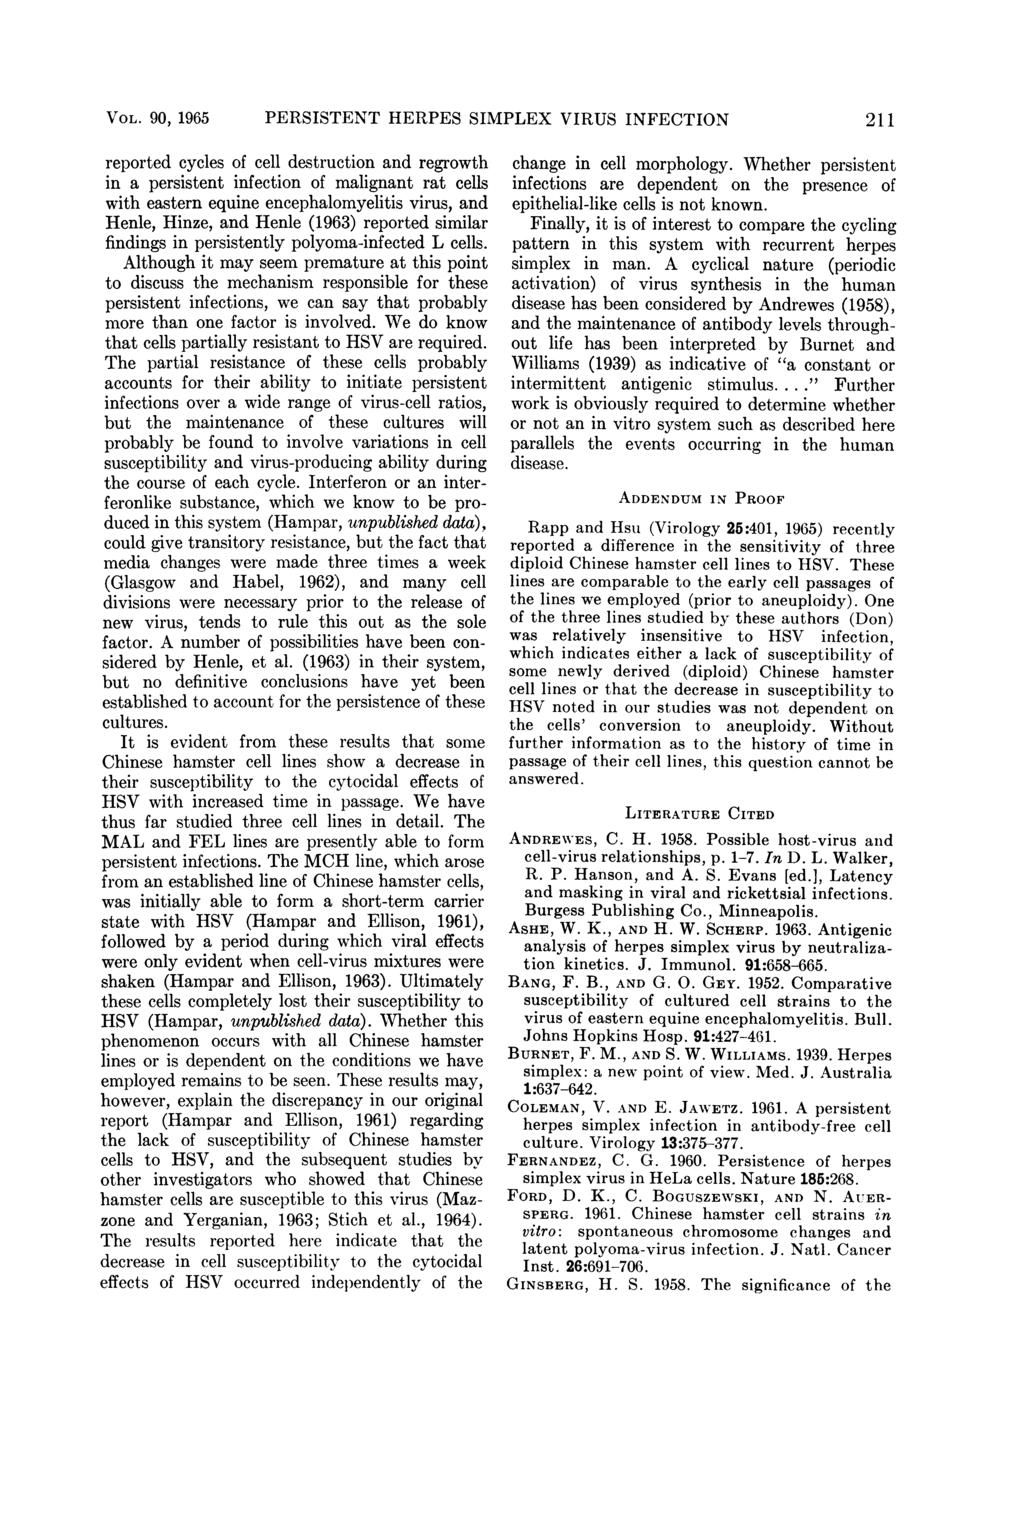 VOL. 90, 1965 PERSISTENT HERPES SIMPLEX VIRUS INFECTION 211 reported cycles of cell destruction and regrowth in a persistent infection of malignant rat cells with eastern equine encephalomyelitis